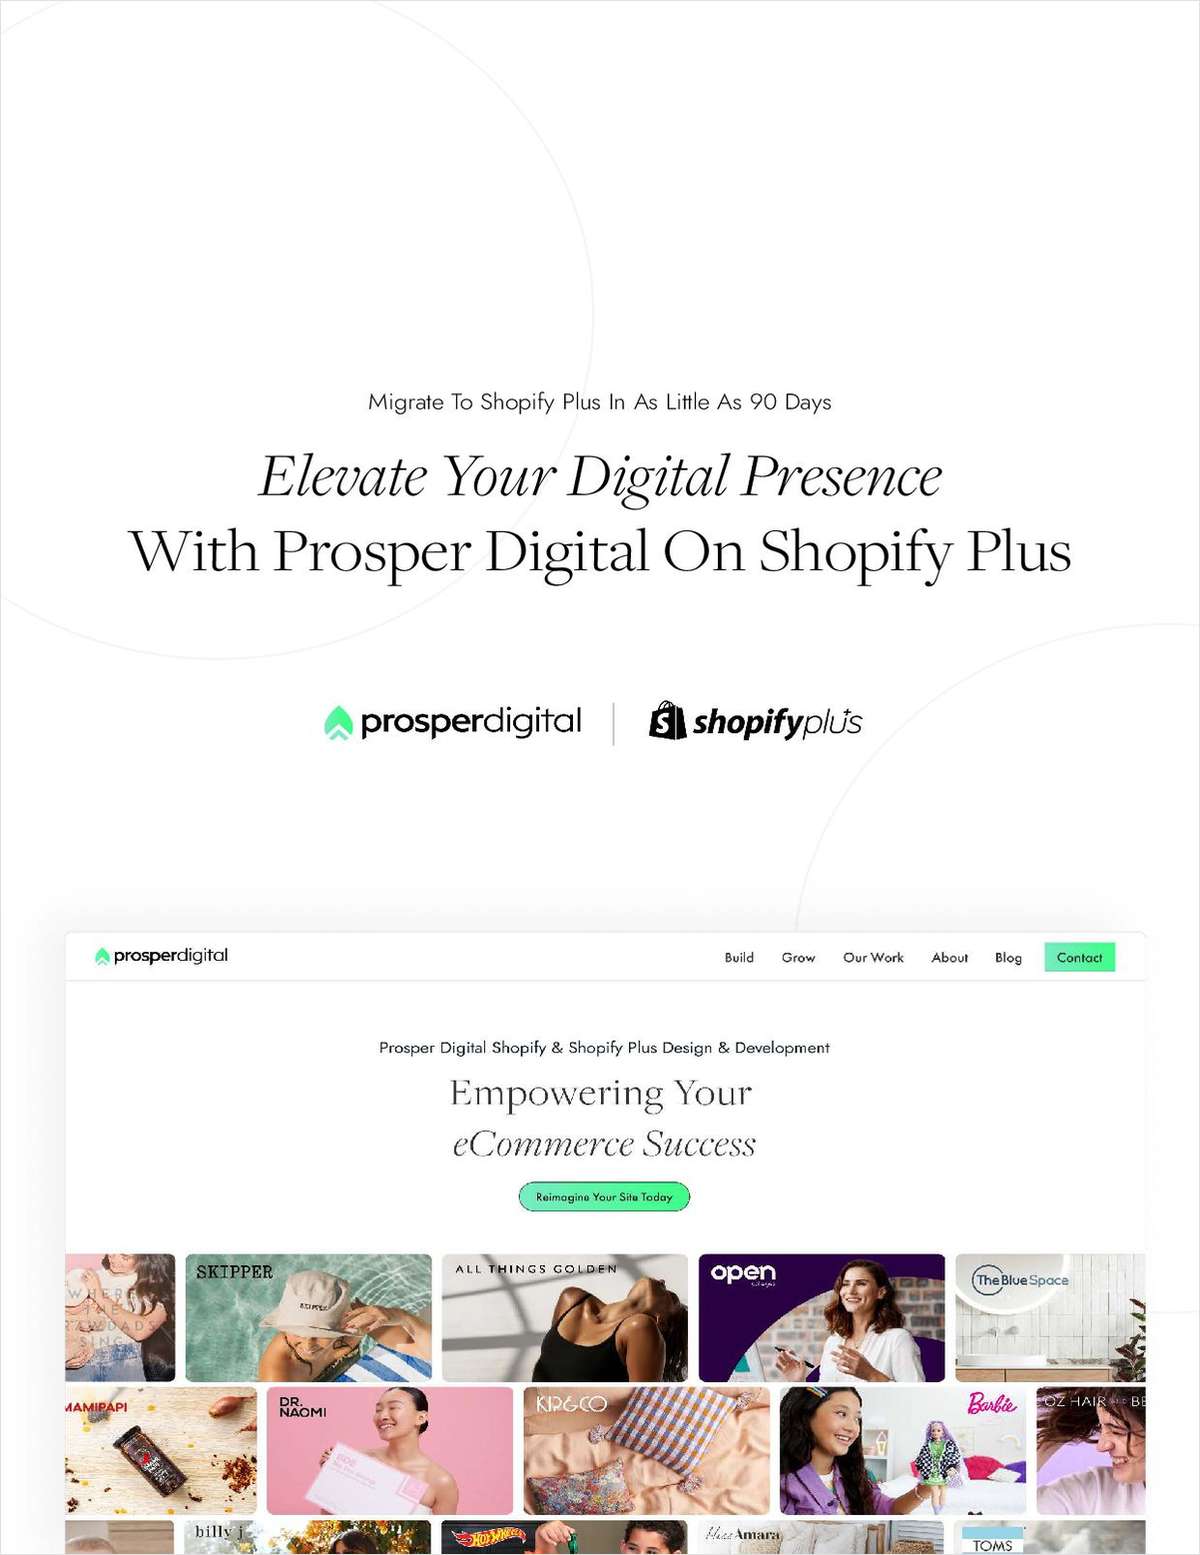 Explore Ways to Elevate Your Digital Presence and Boost Ecommerce Success